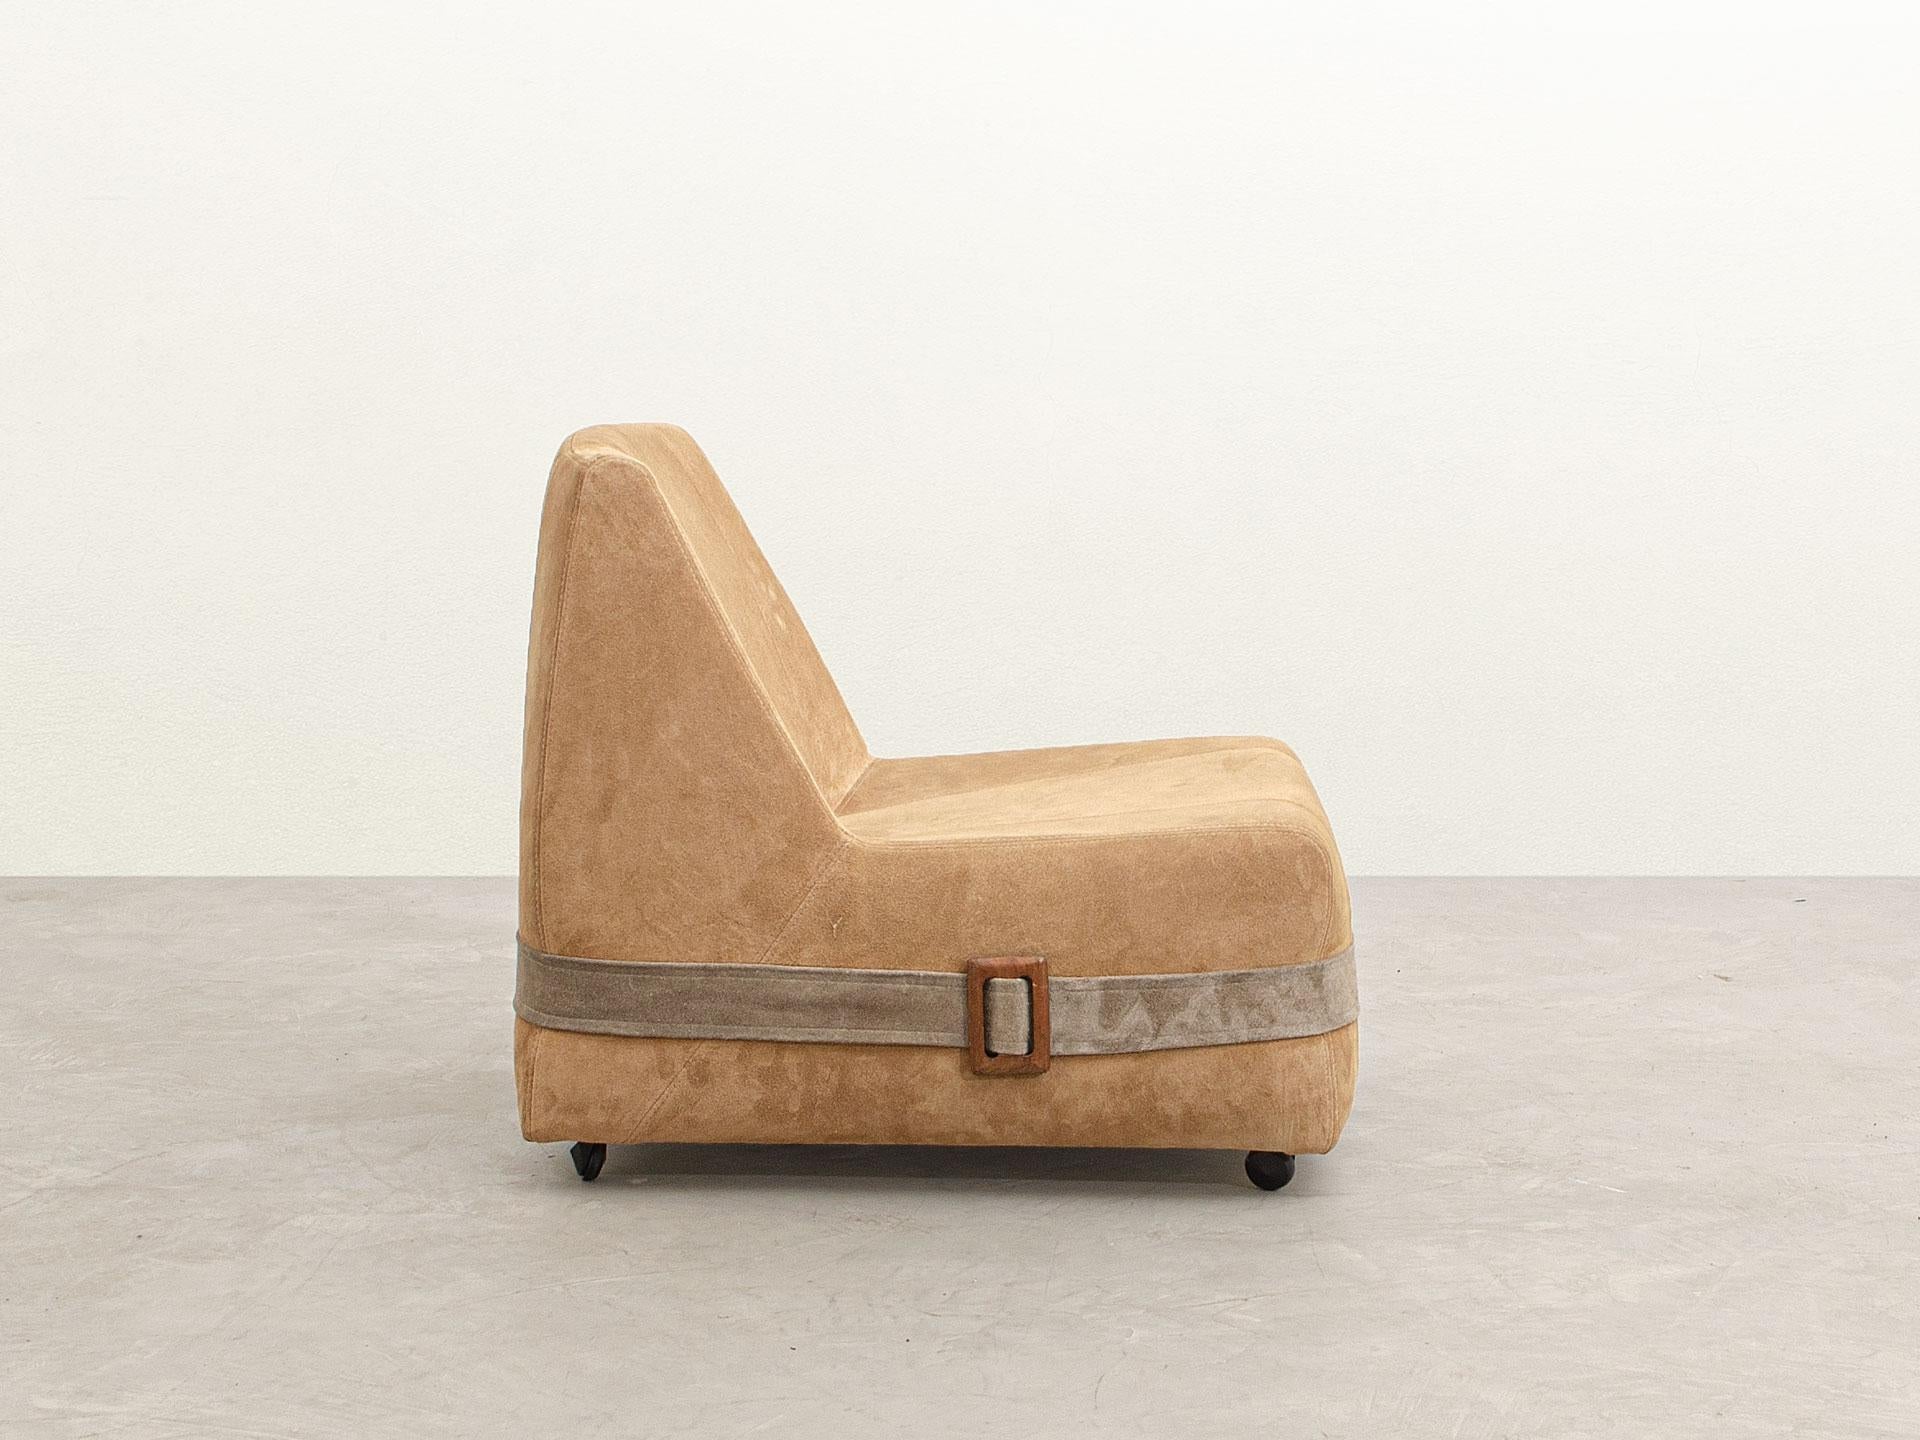 20th Century Rare MP-75 Lounge Chair, by Percival Lafer, Brazilian Mid-Century Modern